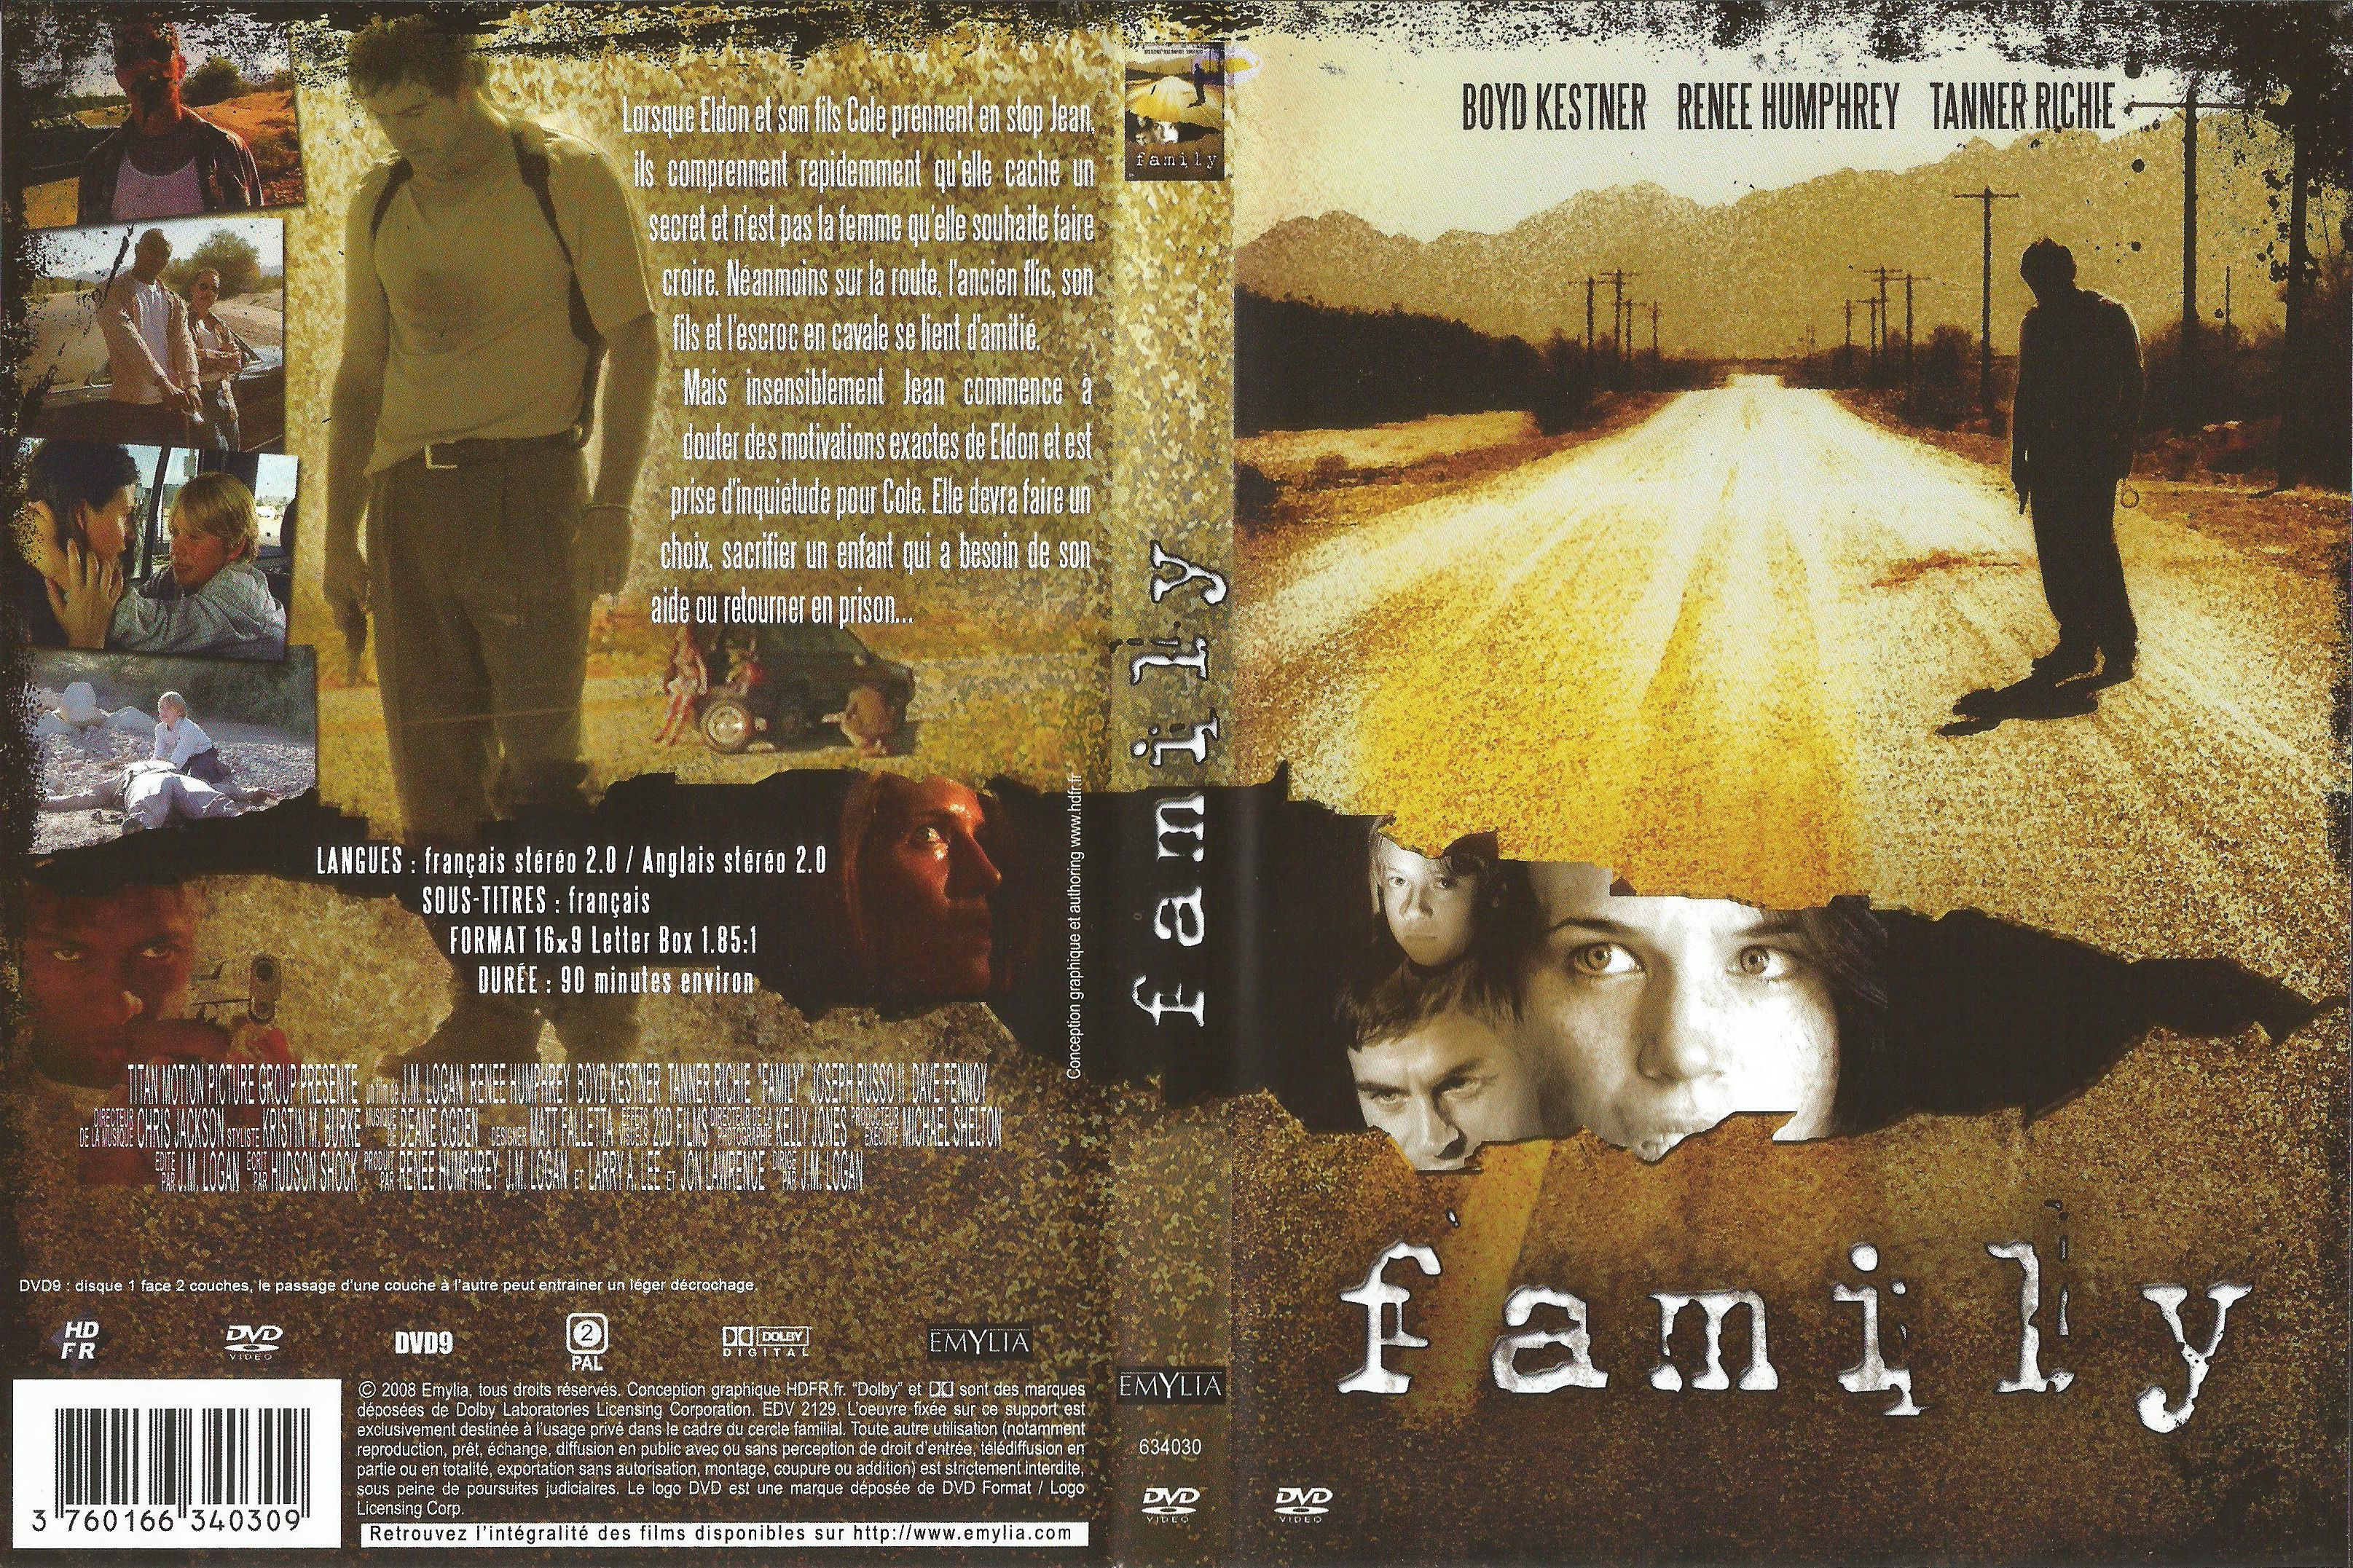 Jaquette DVD Family